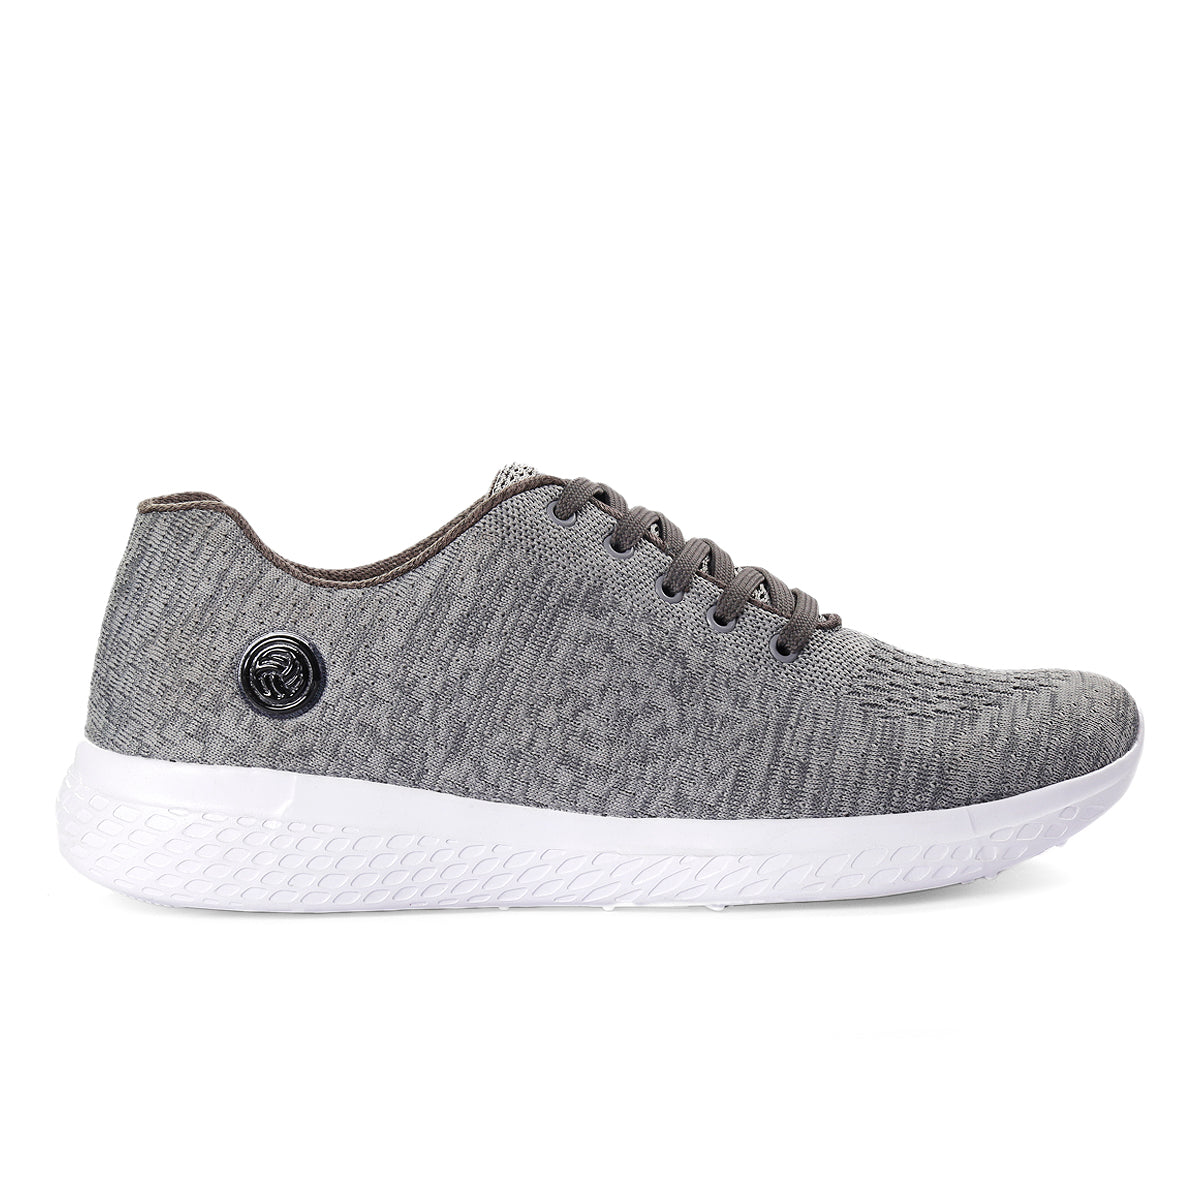 Bacca Bucci Running Shoes Lightweight Sneakers Walking Footwear-PLUS size available - Bacca Bucci